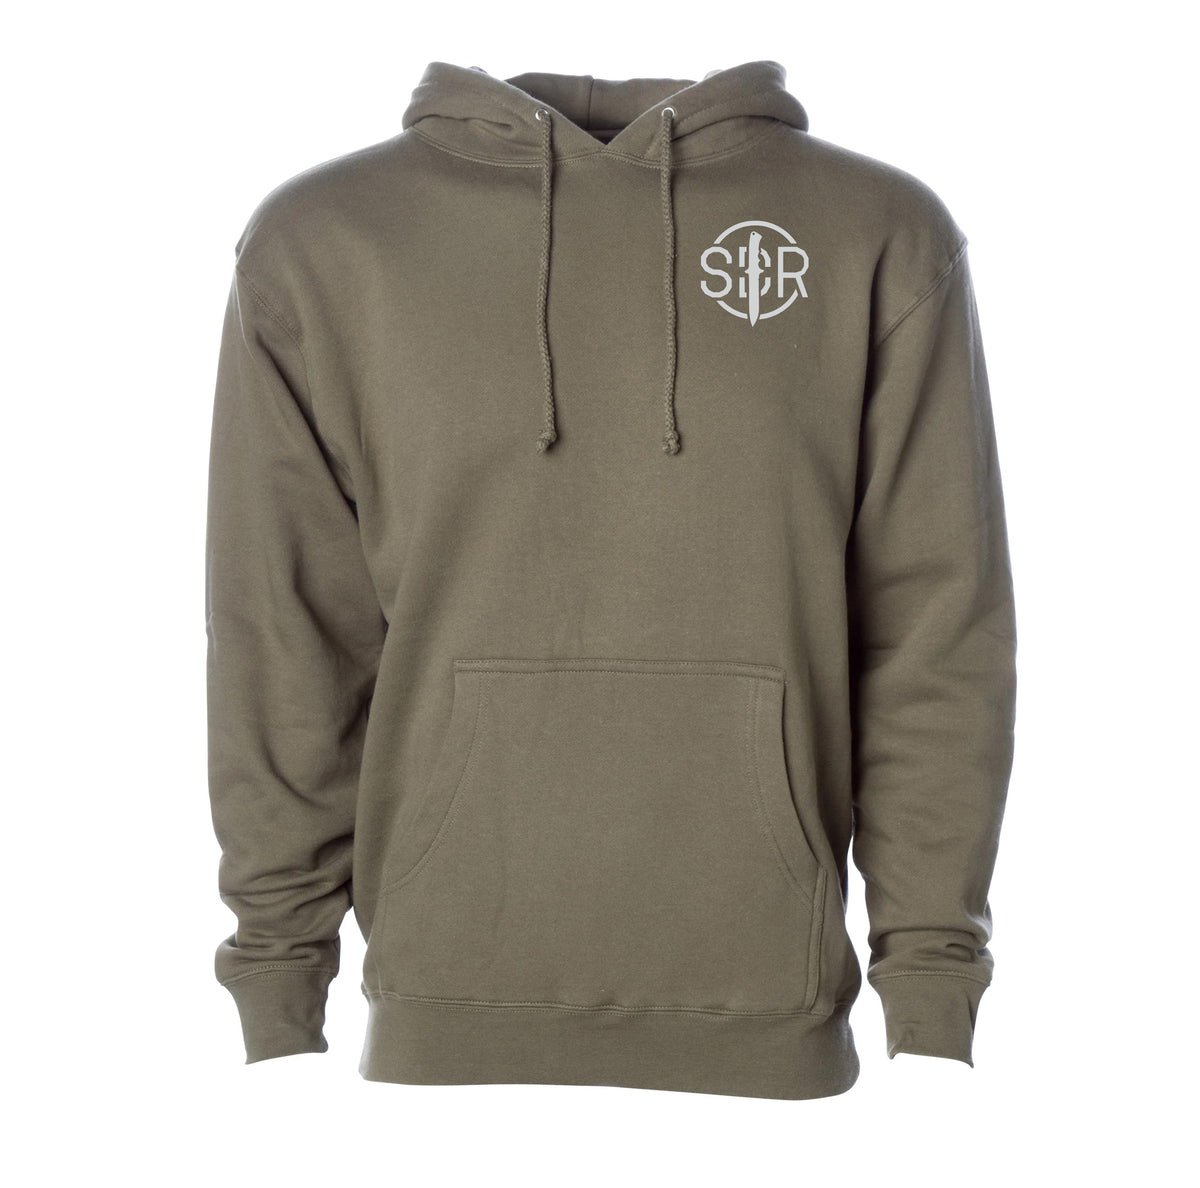 SDR Blade Icon Hoodie